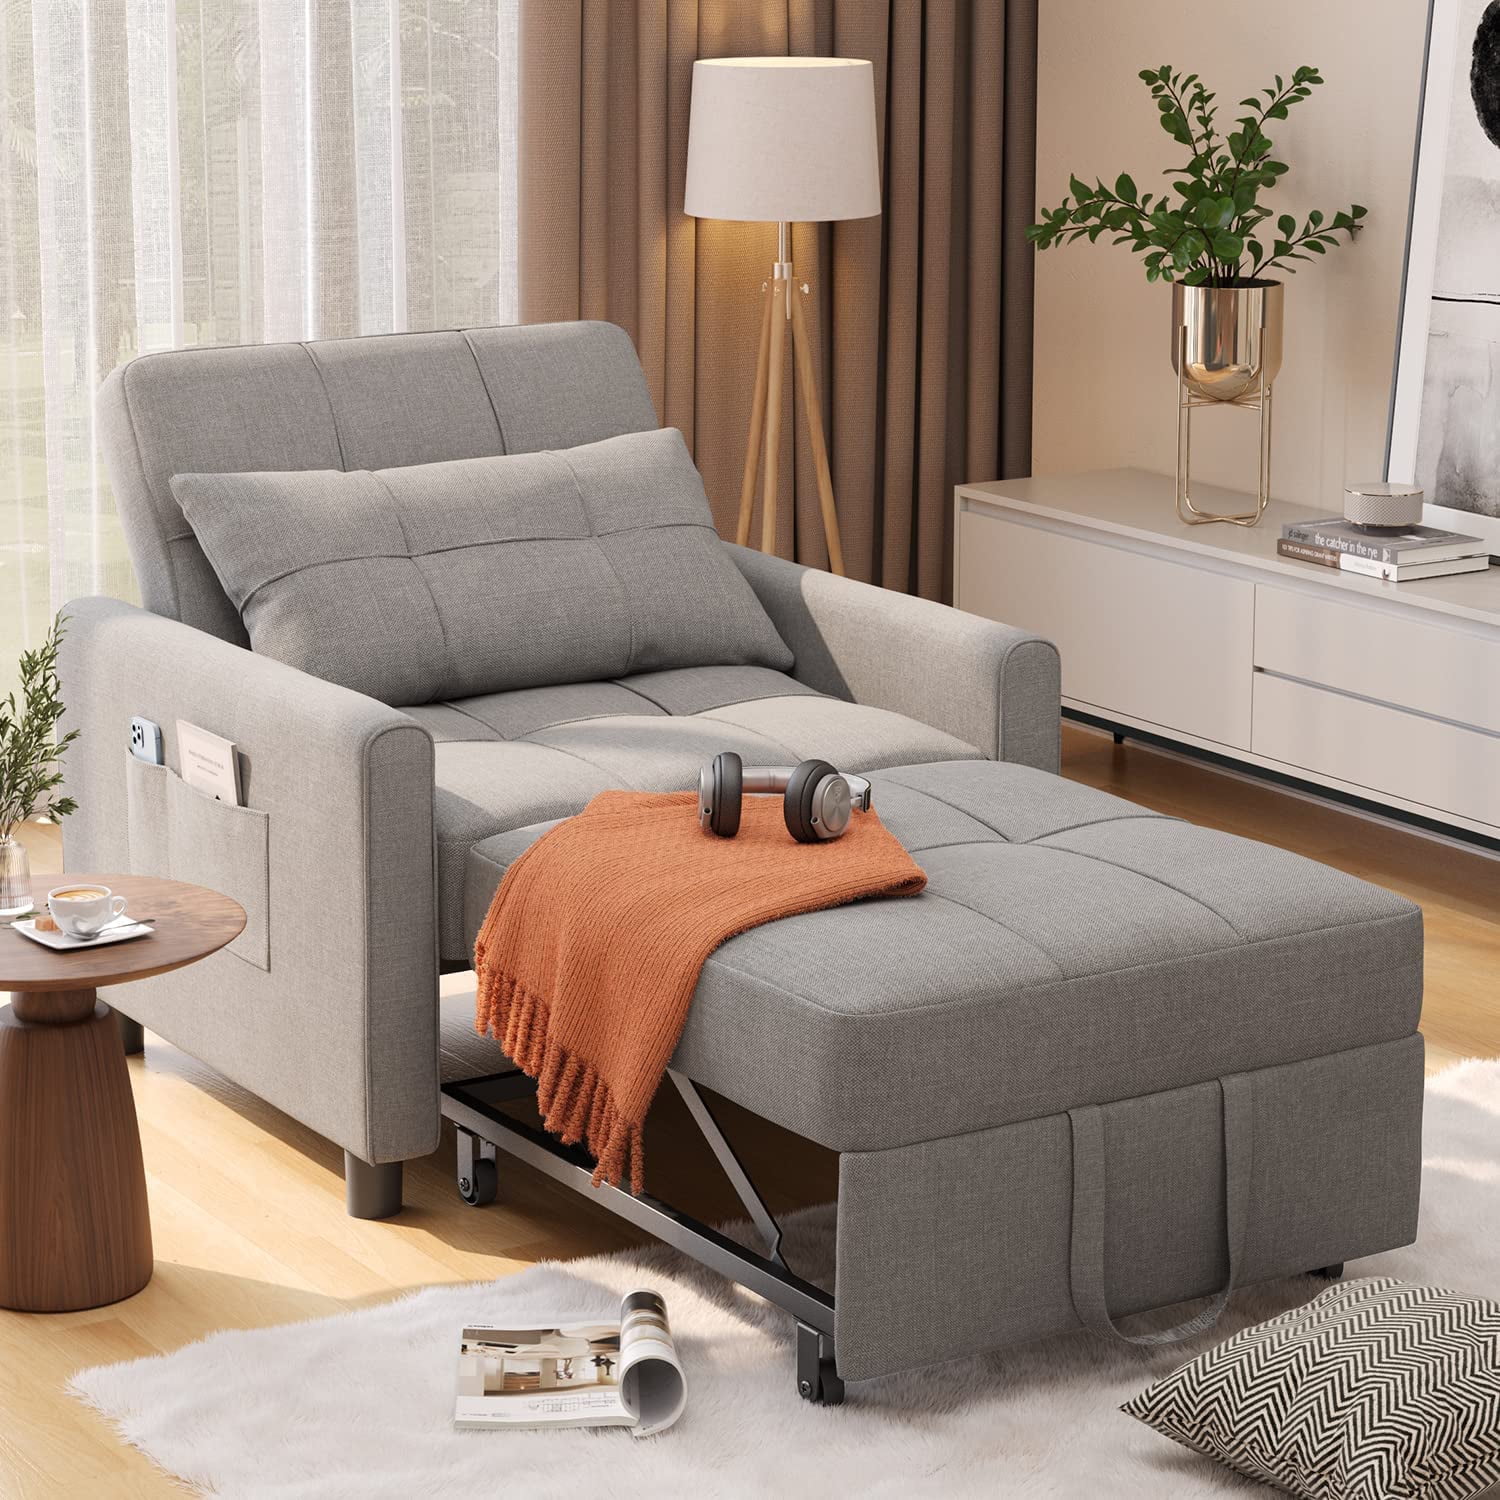 A gray recliner chair with a footrest, perfect for a cozy living room.